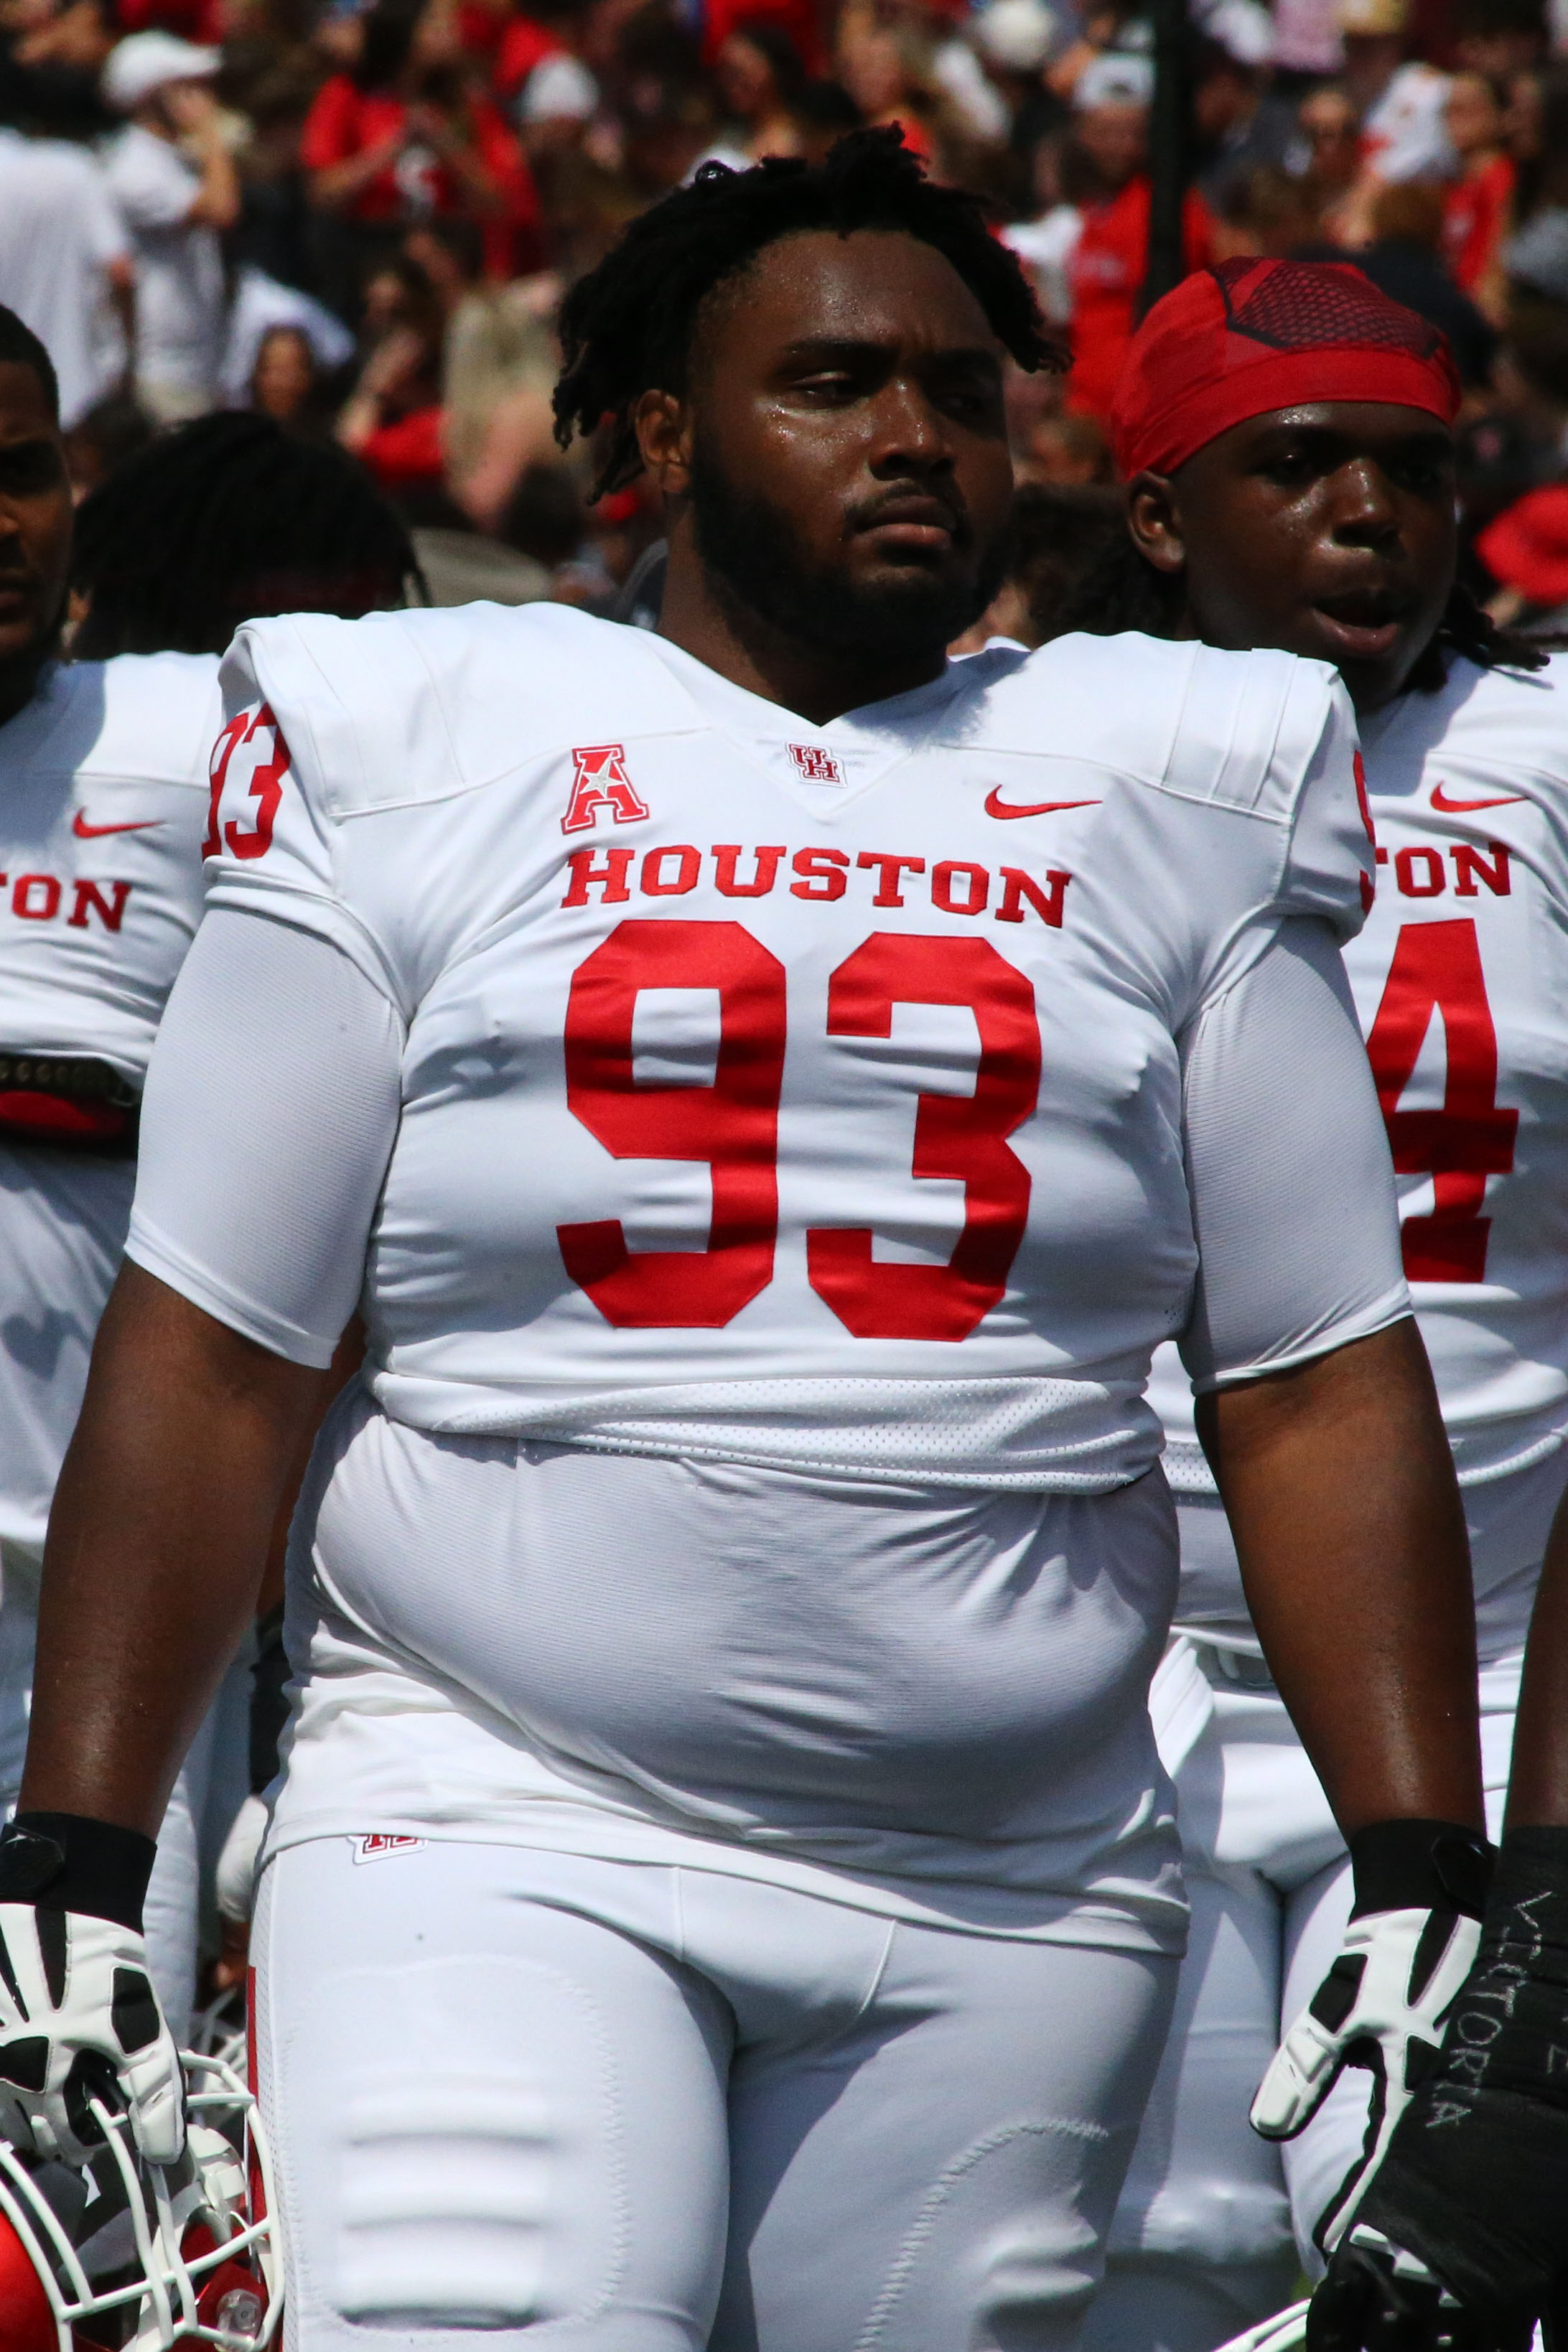 Jamaree Caldwell leaves the field in a game against the Texas Tech Red Raiders.